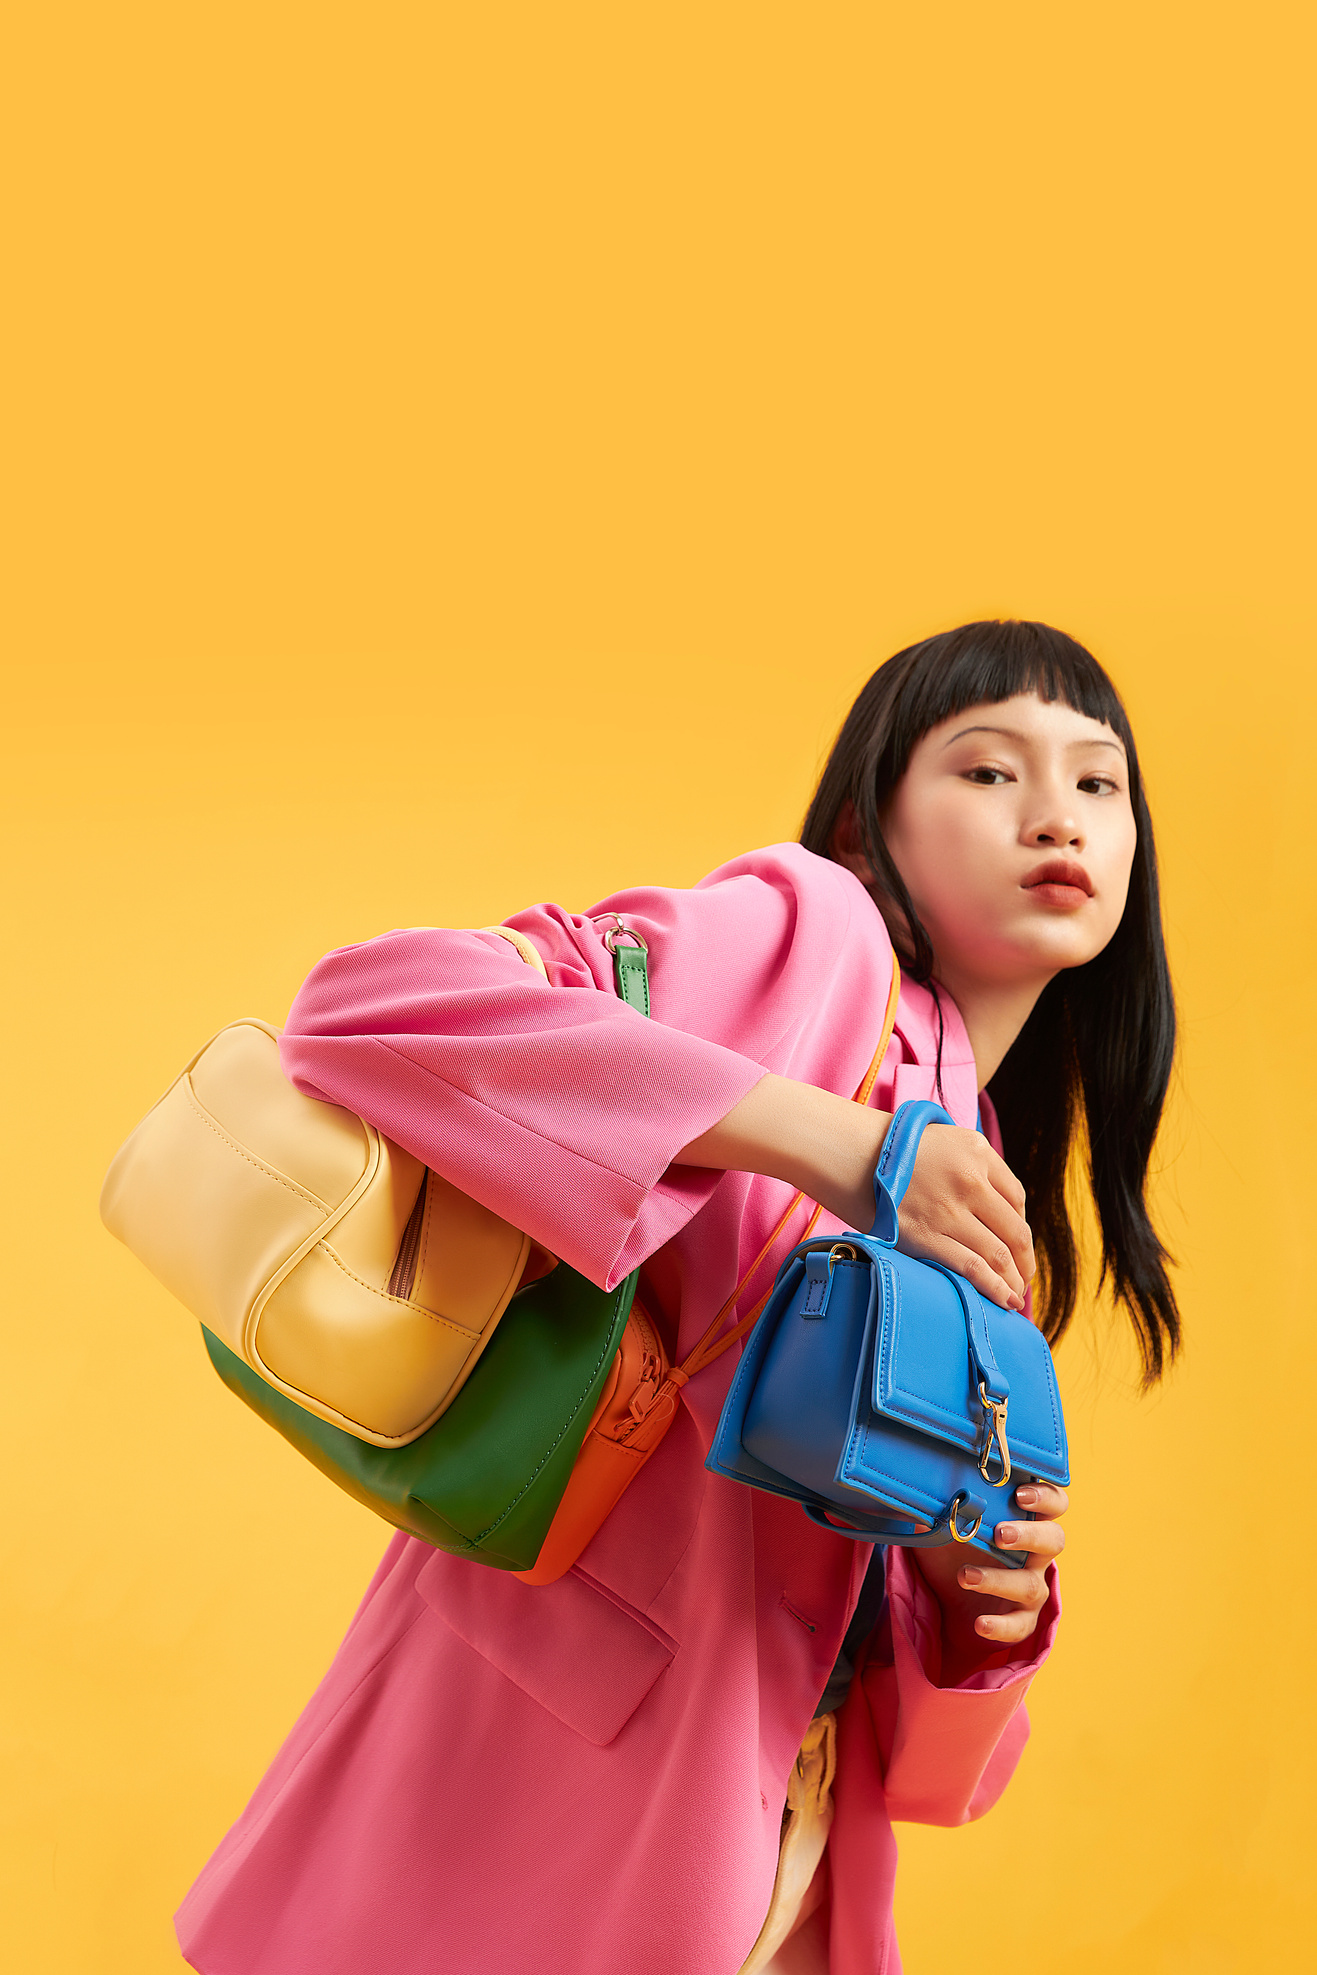 Stylish Woman Carrying Colorful Bags